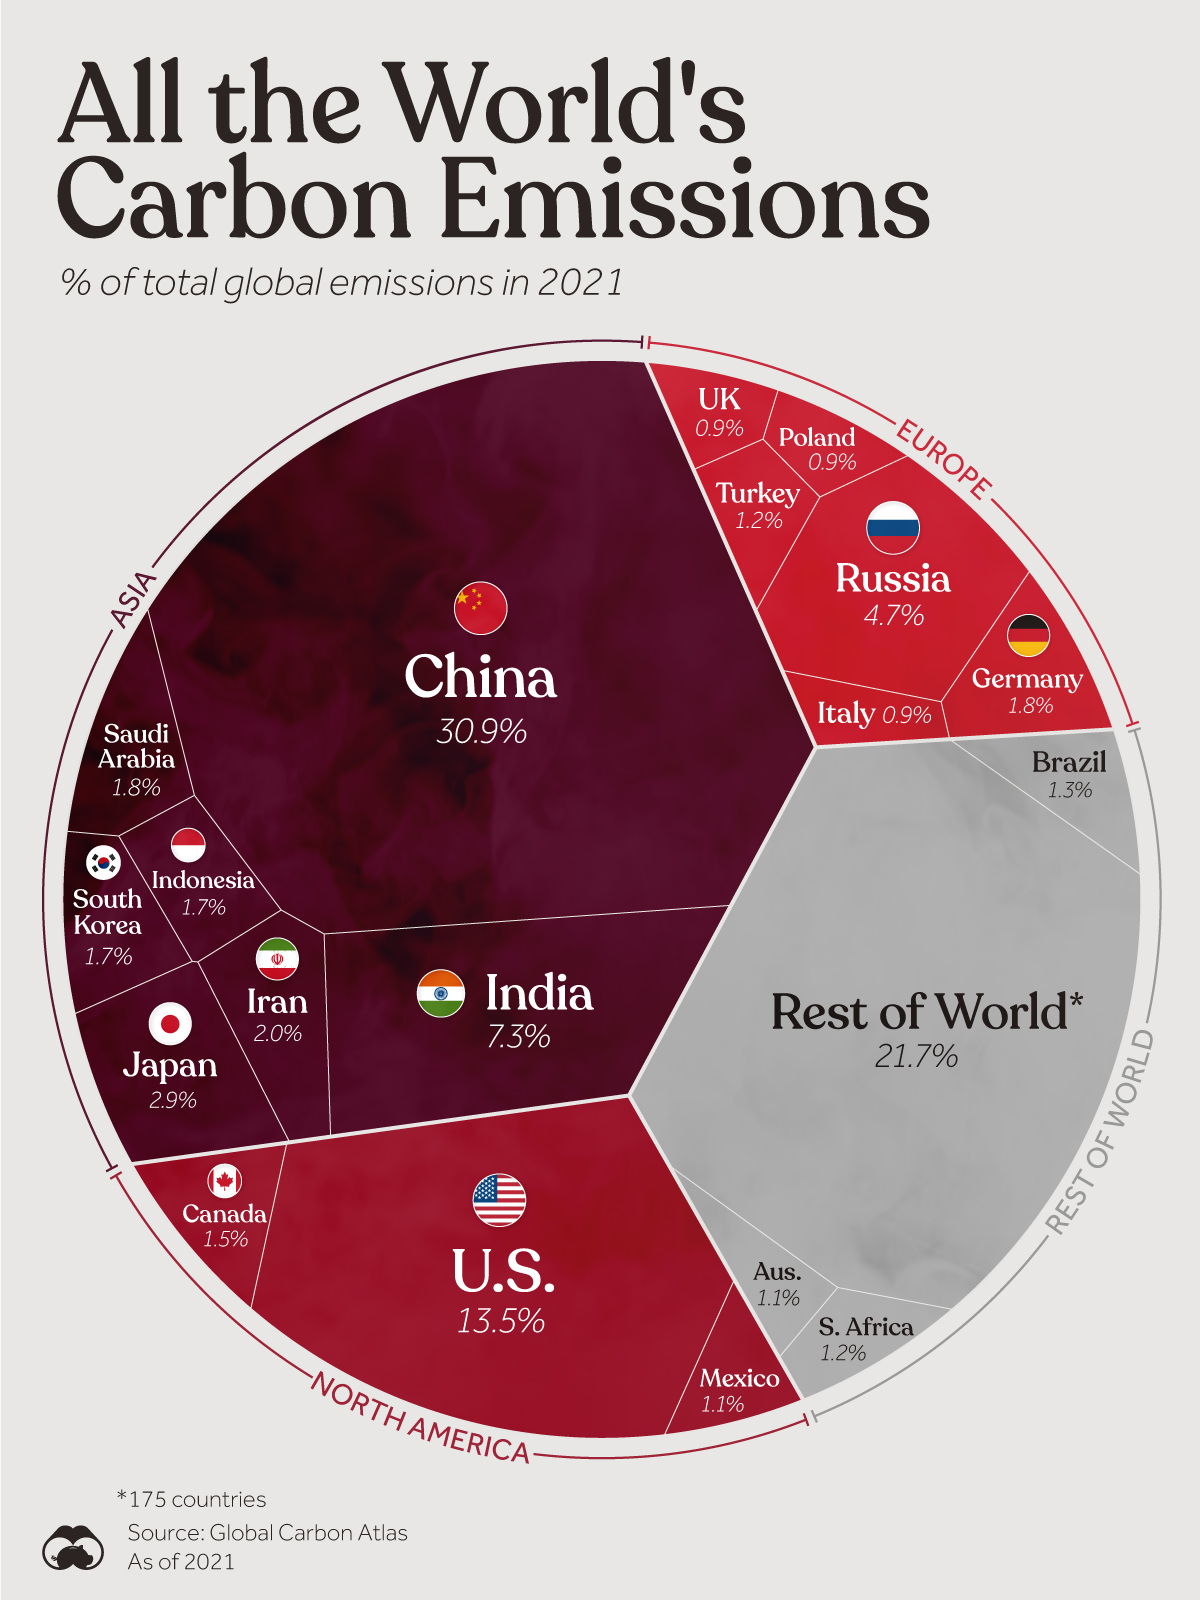 Visualizing All the World's Carbon Emissions by Country